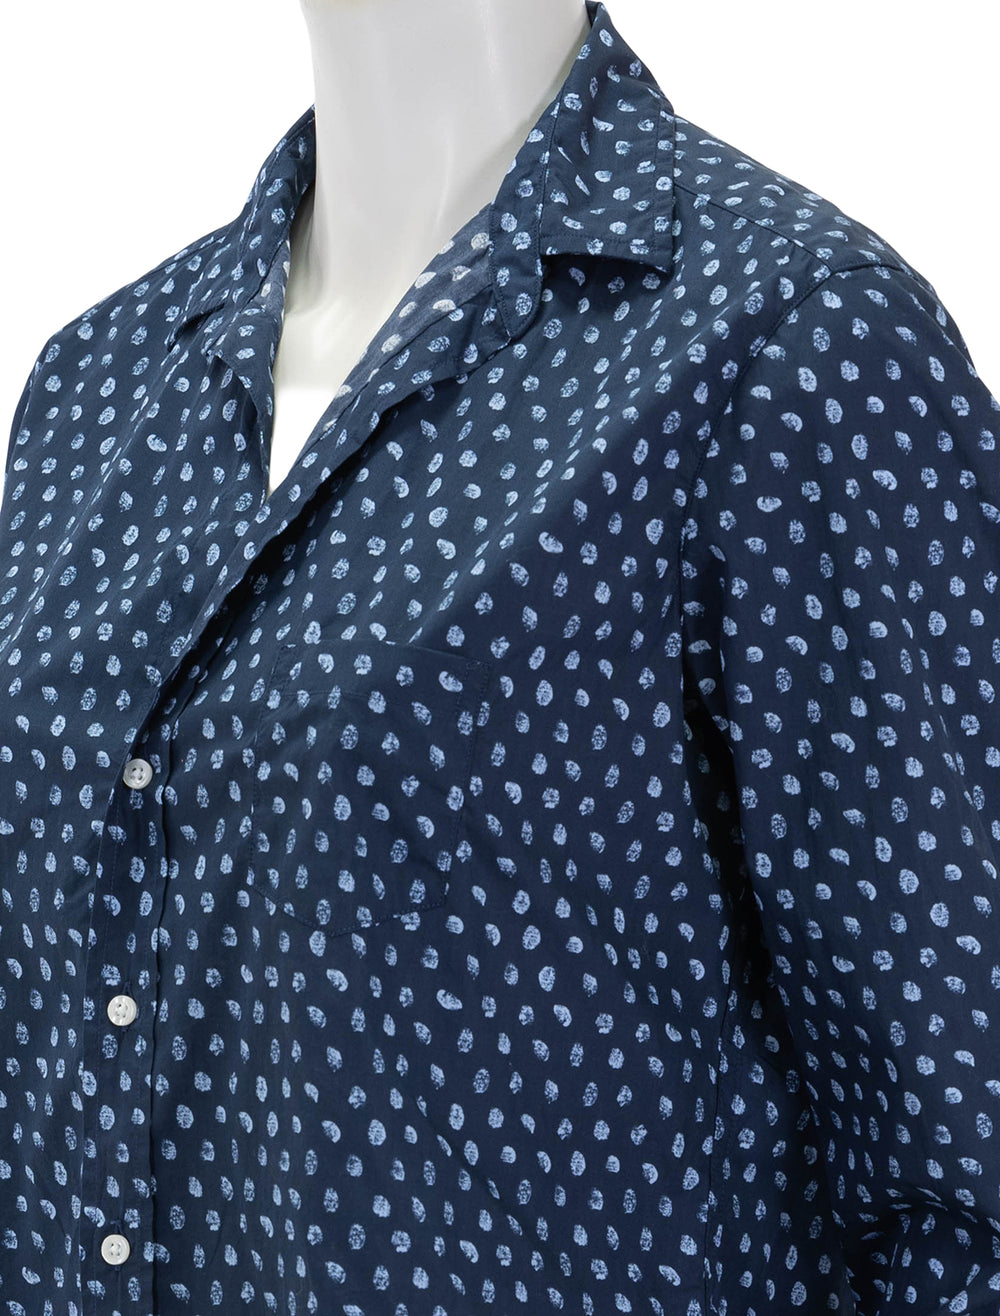 Close-up view of Frank & Eileen's eileen in messy navy with blue dots.